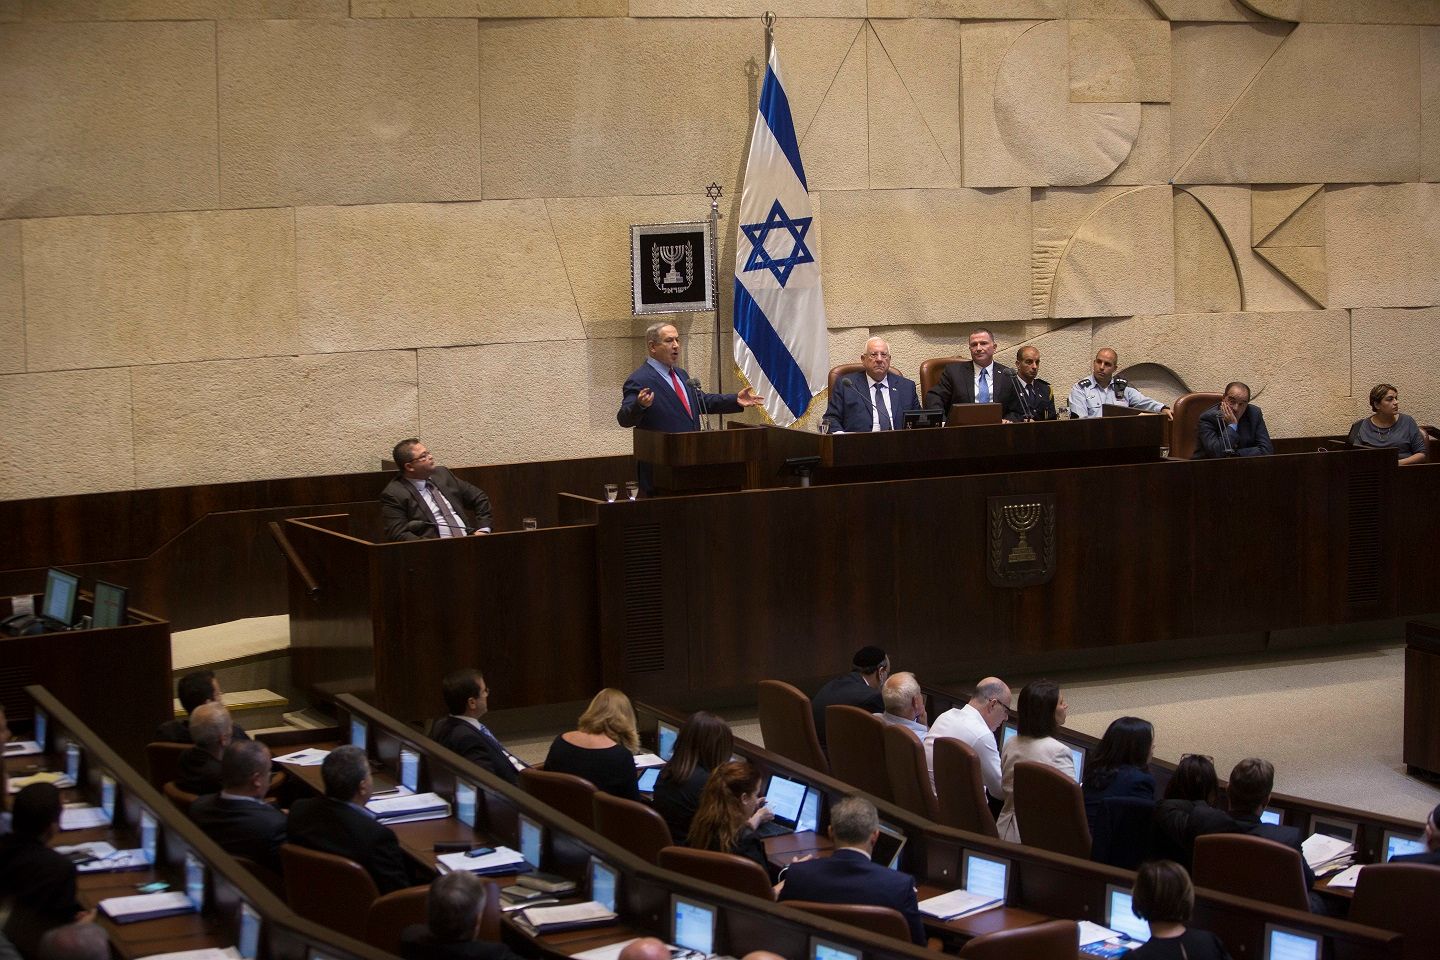 FILE - Israeli Prime Minister, Benjamin Netanyahu, gestures during a speech at the Knesset, Israel's Parliament in Jerusalem, Monday, Oct. 31, 2016.